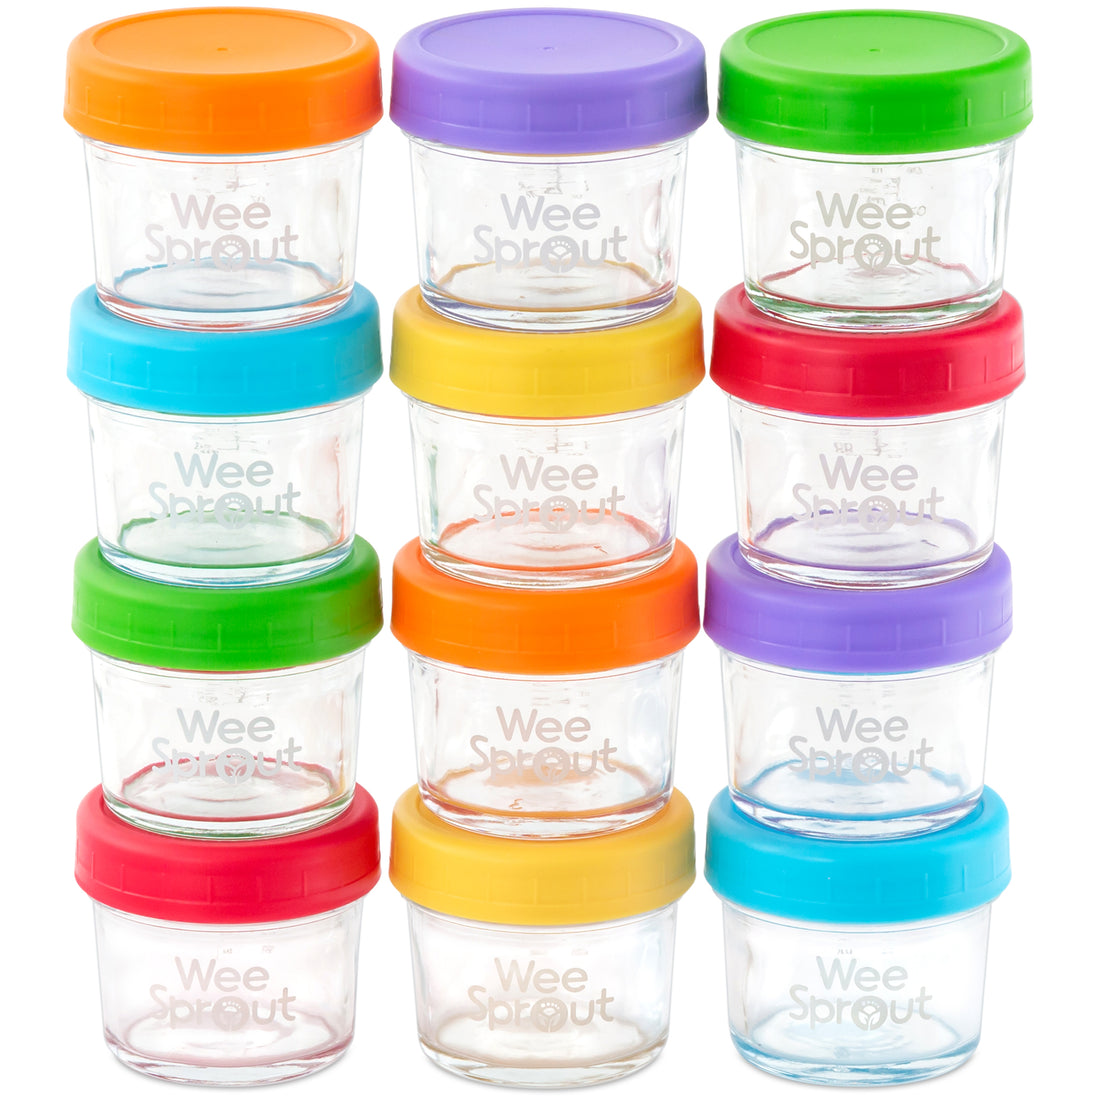 https://www.momjunction.com/wp-content/uploads/product-images/wee-sprout-baby-food-storage-glass-containers_afl391.jpg